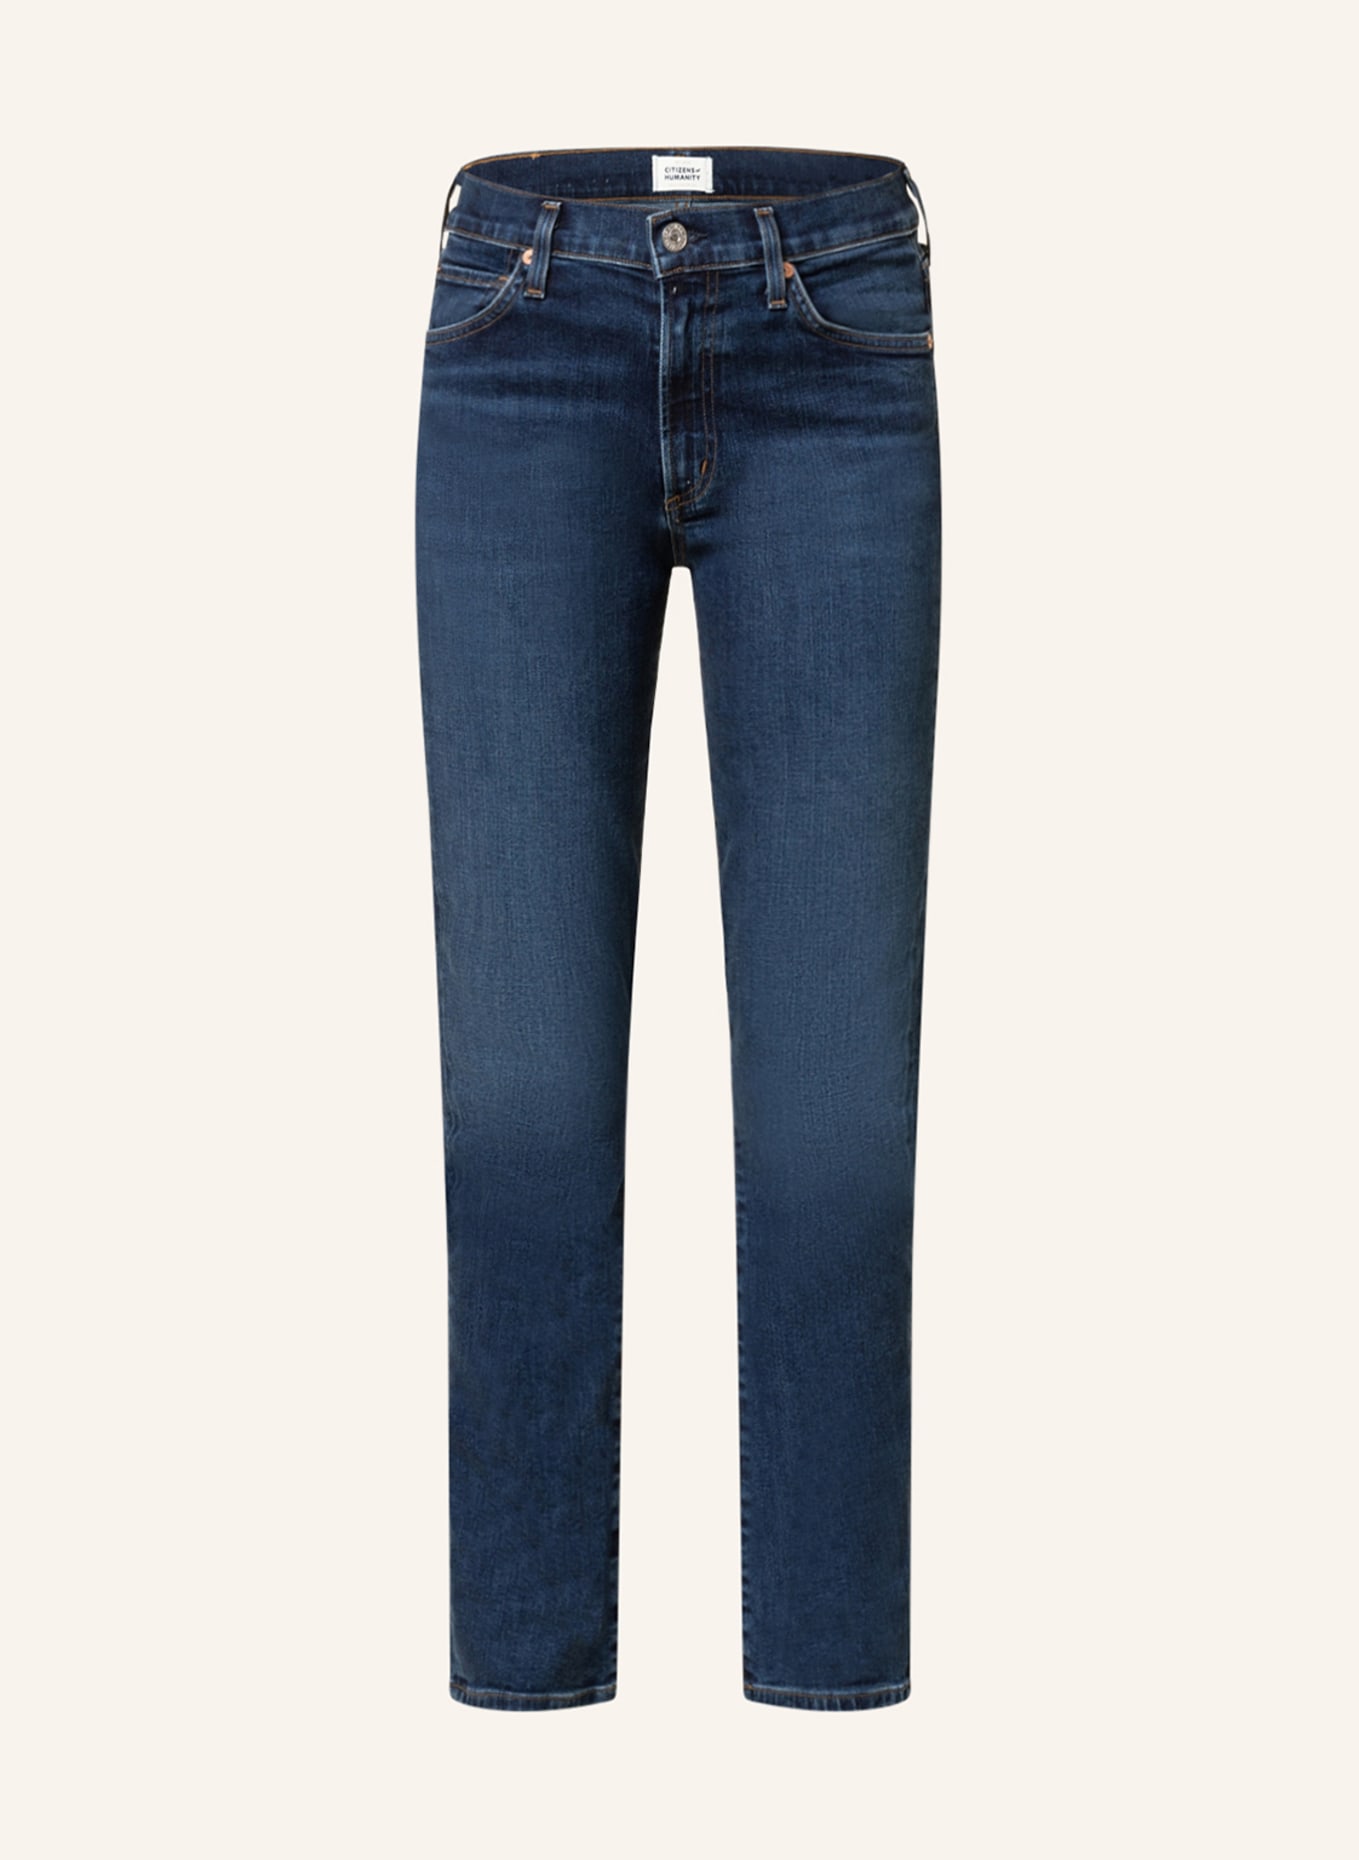 CITIZENS of HUMANITY Skinny jeans SKYLA , Color: Evermore dk indigo (Image 1)